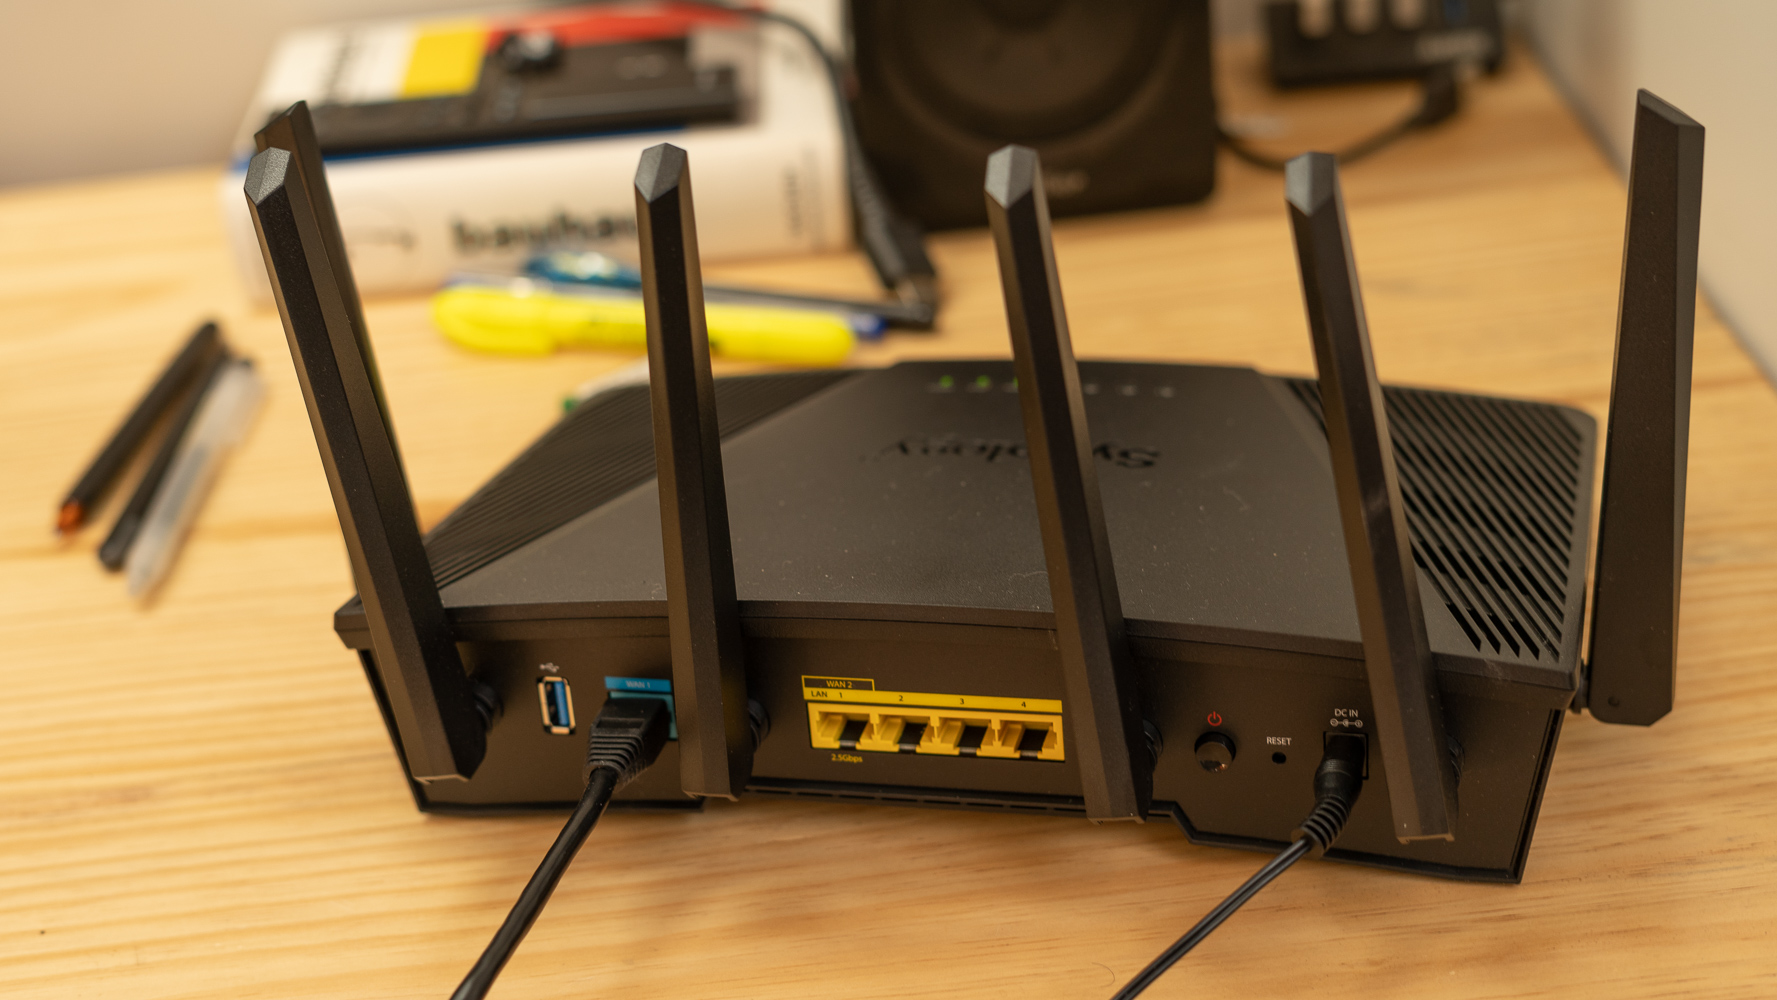 The rear of a Synology RT6600ax Wi-Fi router. It rests on a wooden table in front of some other electornics and books.